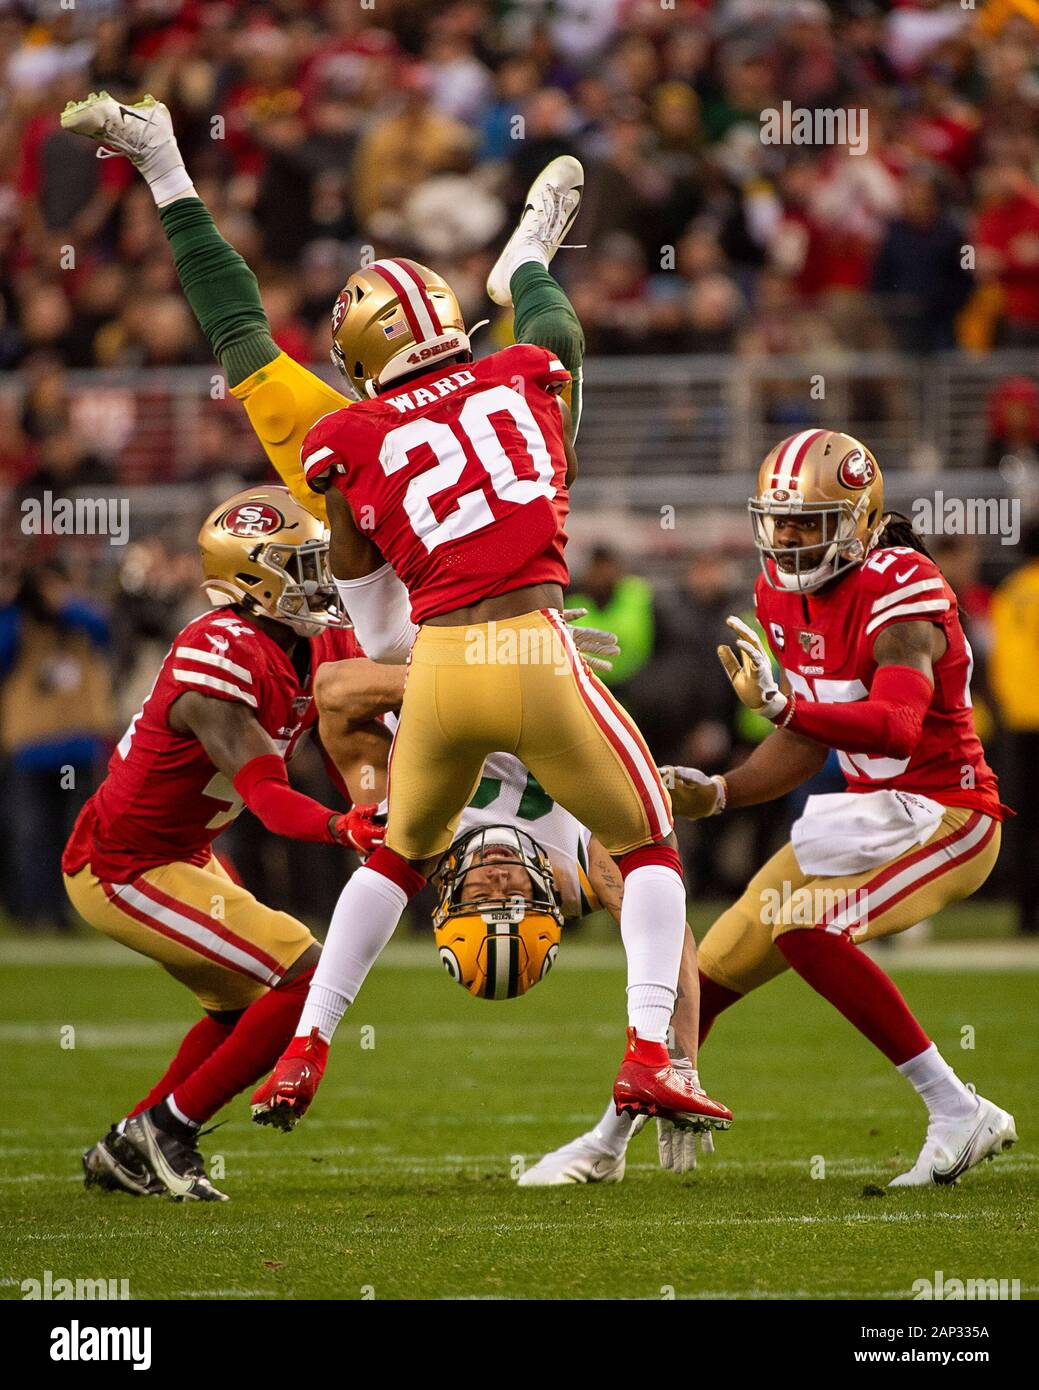 Santa Clara, CA, USA. 19th Jan, 2020. San Francisco 49ers free safety JIMMIE WARD (20) and San Francisco 49ers defensive back EMMANUEL MOSELEY (41) upend Green Bay Packers wide receiver ALLEN LAZARD (13) in the second quarter during the NFC Championship game at Levi's Stadium in Santa Clara. The 49ers won 37:20. Credit: Paul Kitagaki Jr./ZUMA Wire/Alamy Live News Stock Photo